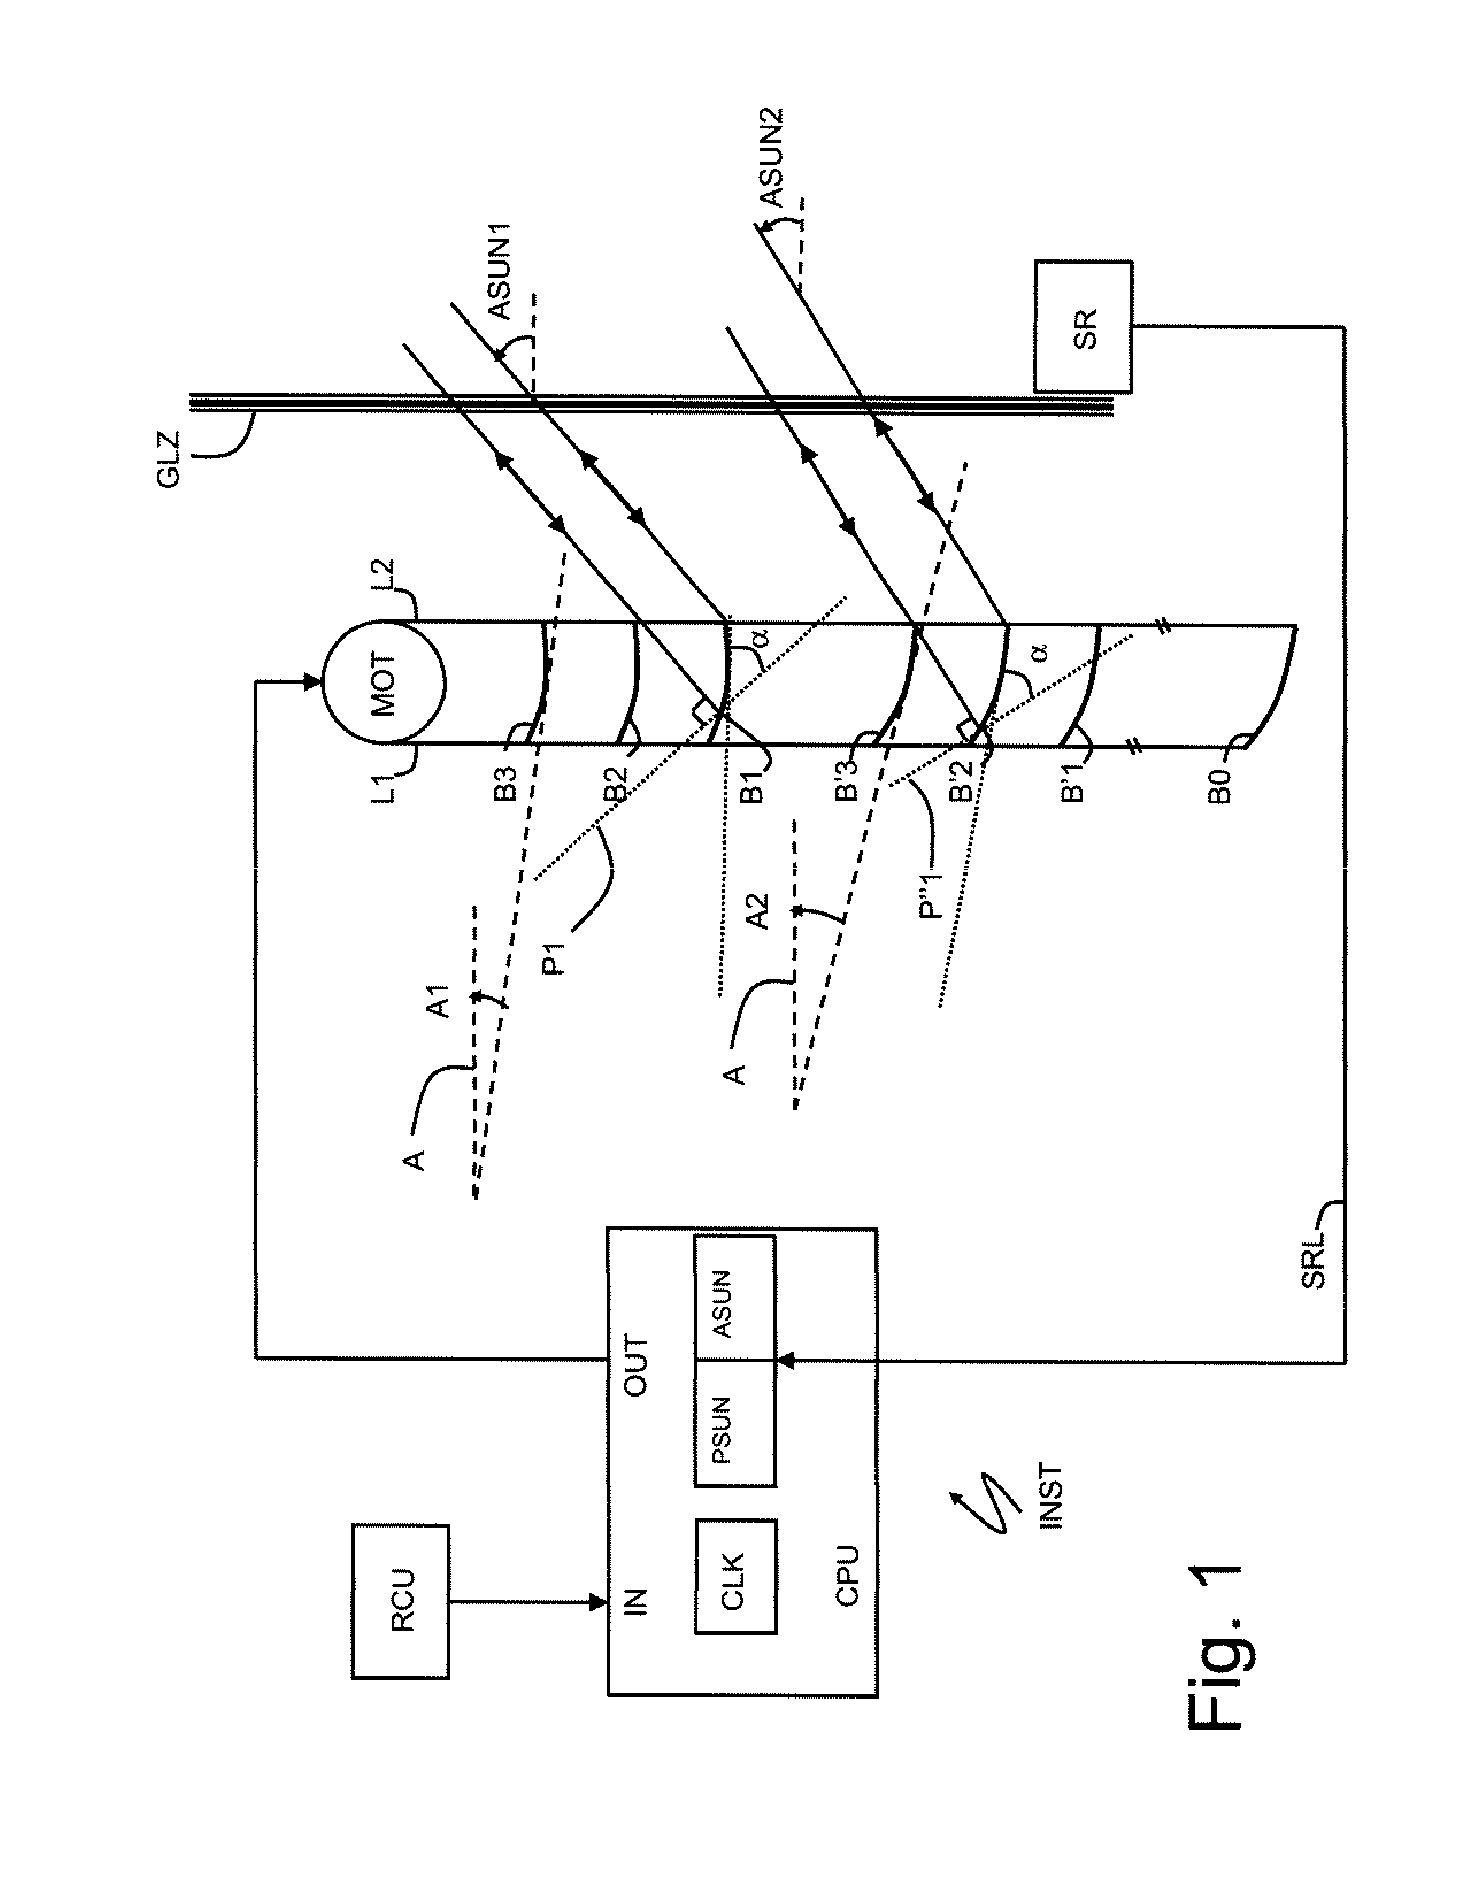 Method for the automated control of a sun-shading device